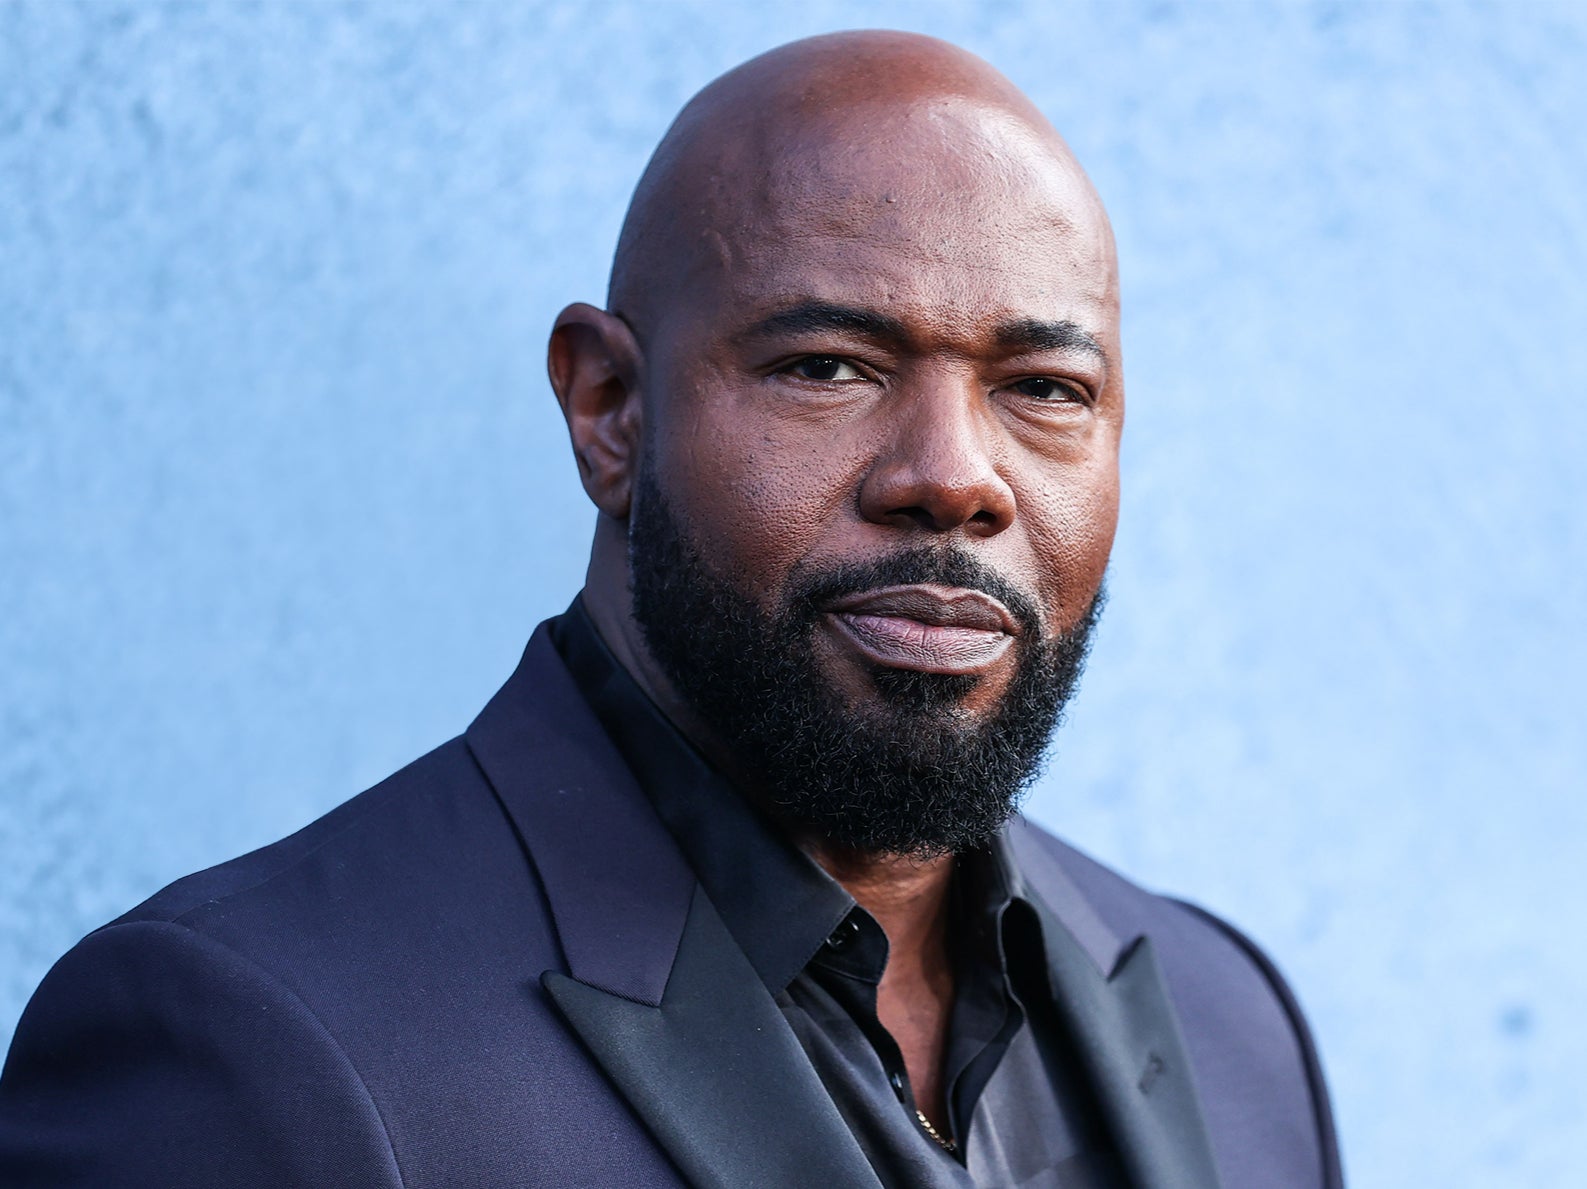 Antoine Fuqua Net Worth The Acclaimed American Film Director with a